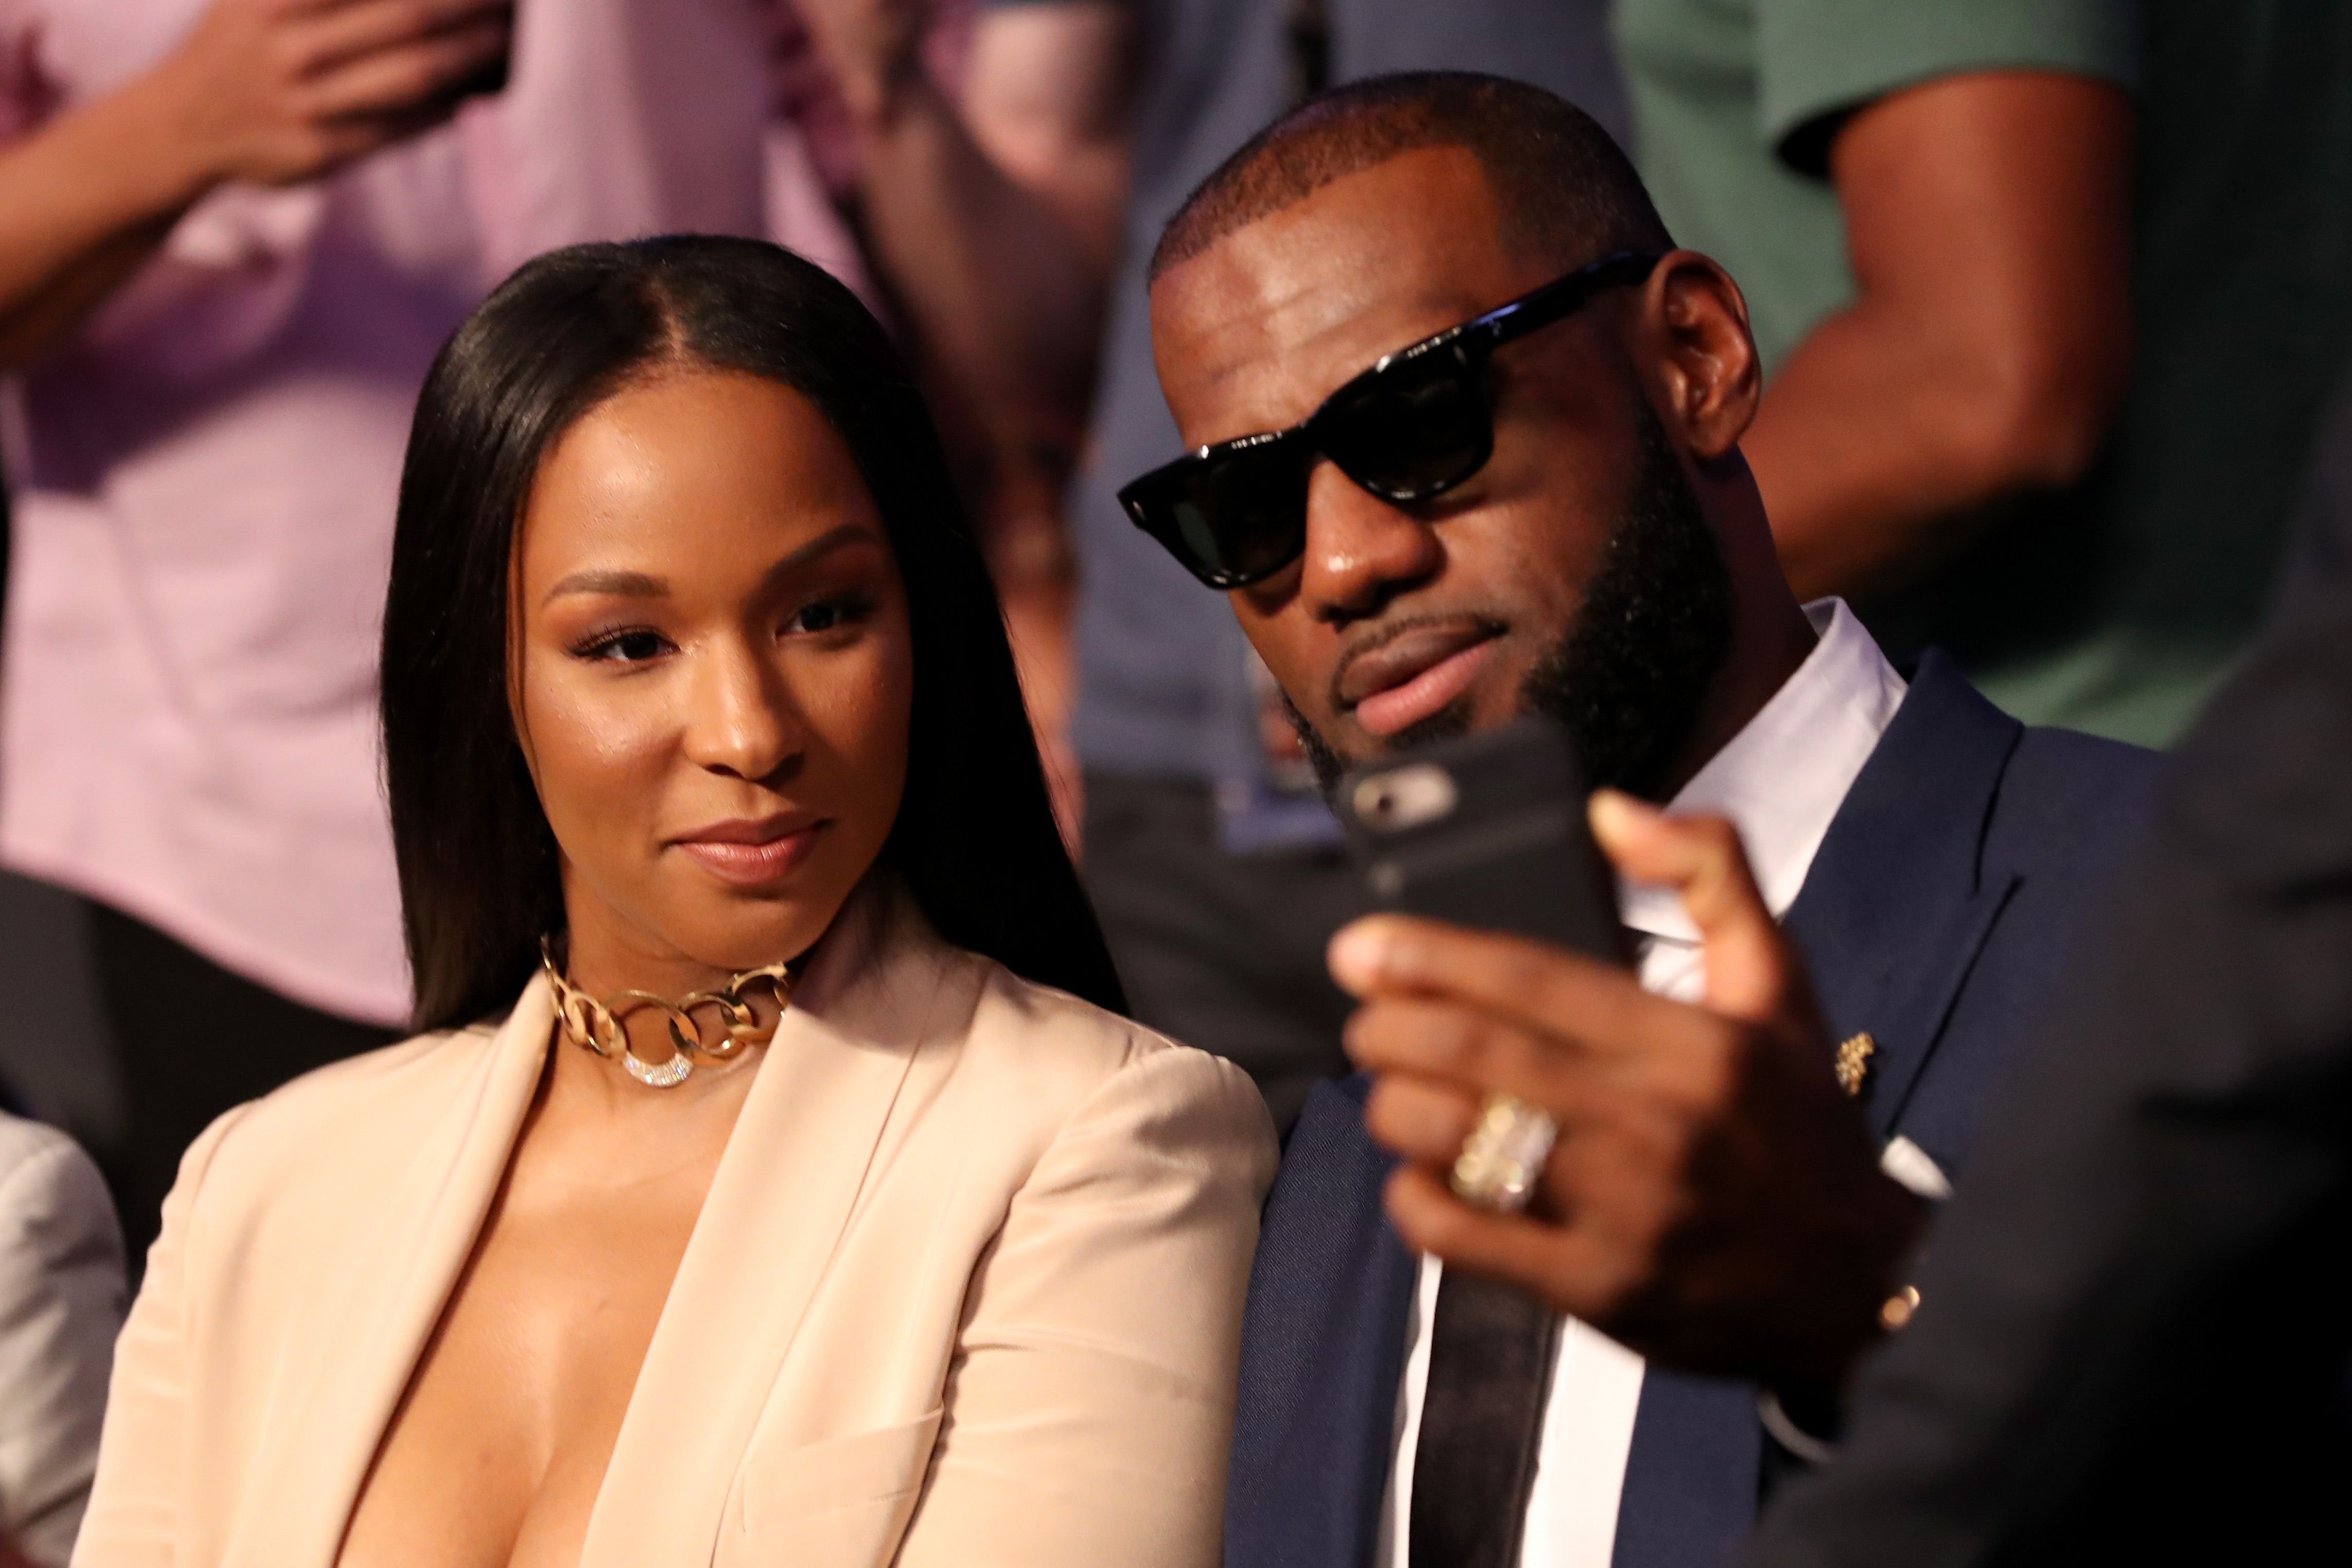 Lebron James and wife Savannah Brinson at the super welterweight boxing match between Floyd Mayweather Jr. and Conor McGregor on August 26, 2017 | Photo: Getty Images